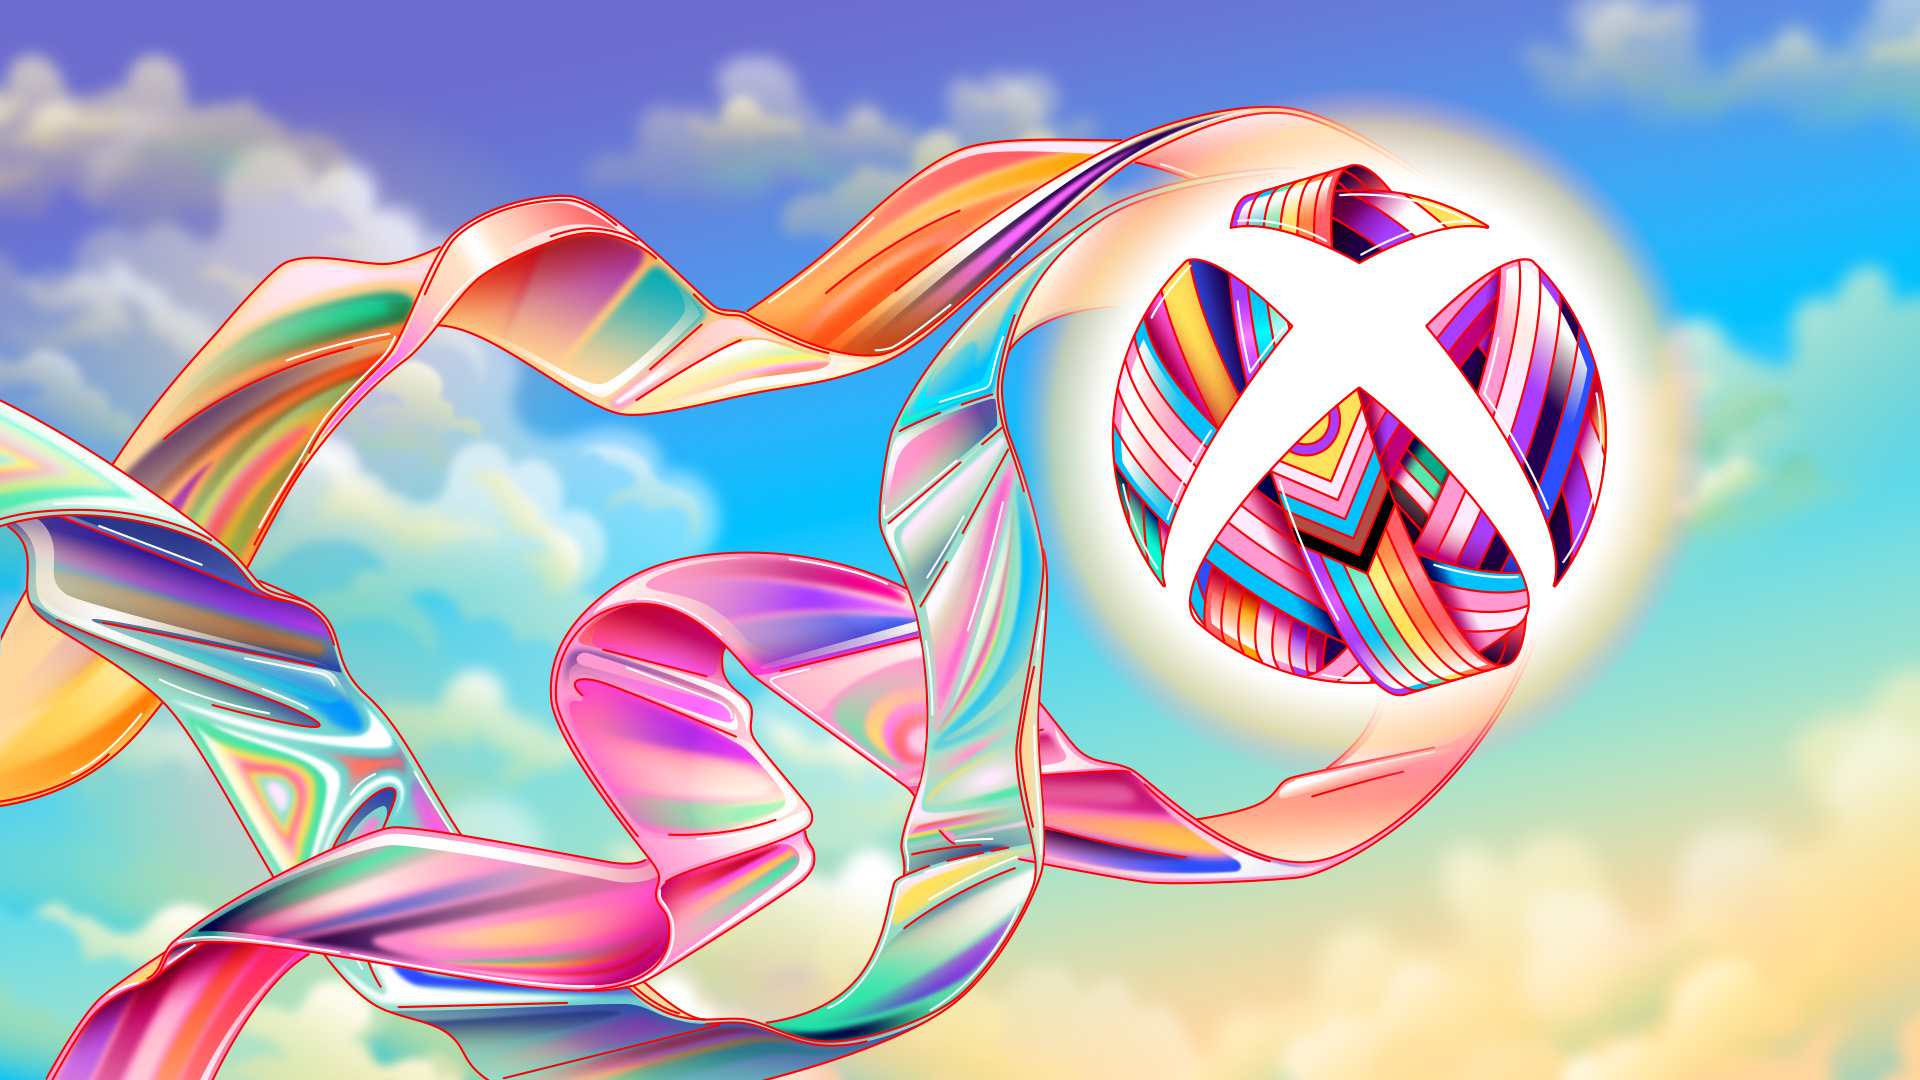 Stylized Xbox logo in support of Pride including colorful trailing ribbons wrapping around the sphere on a pastel sky background.